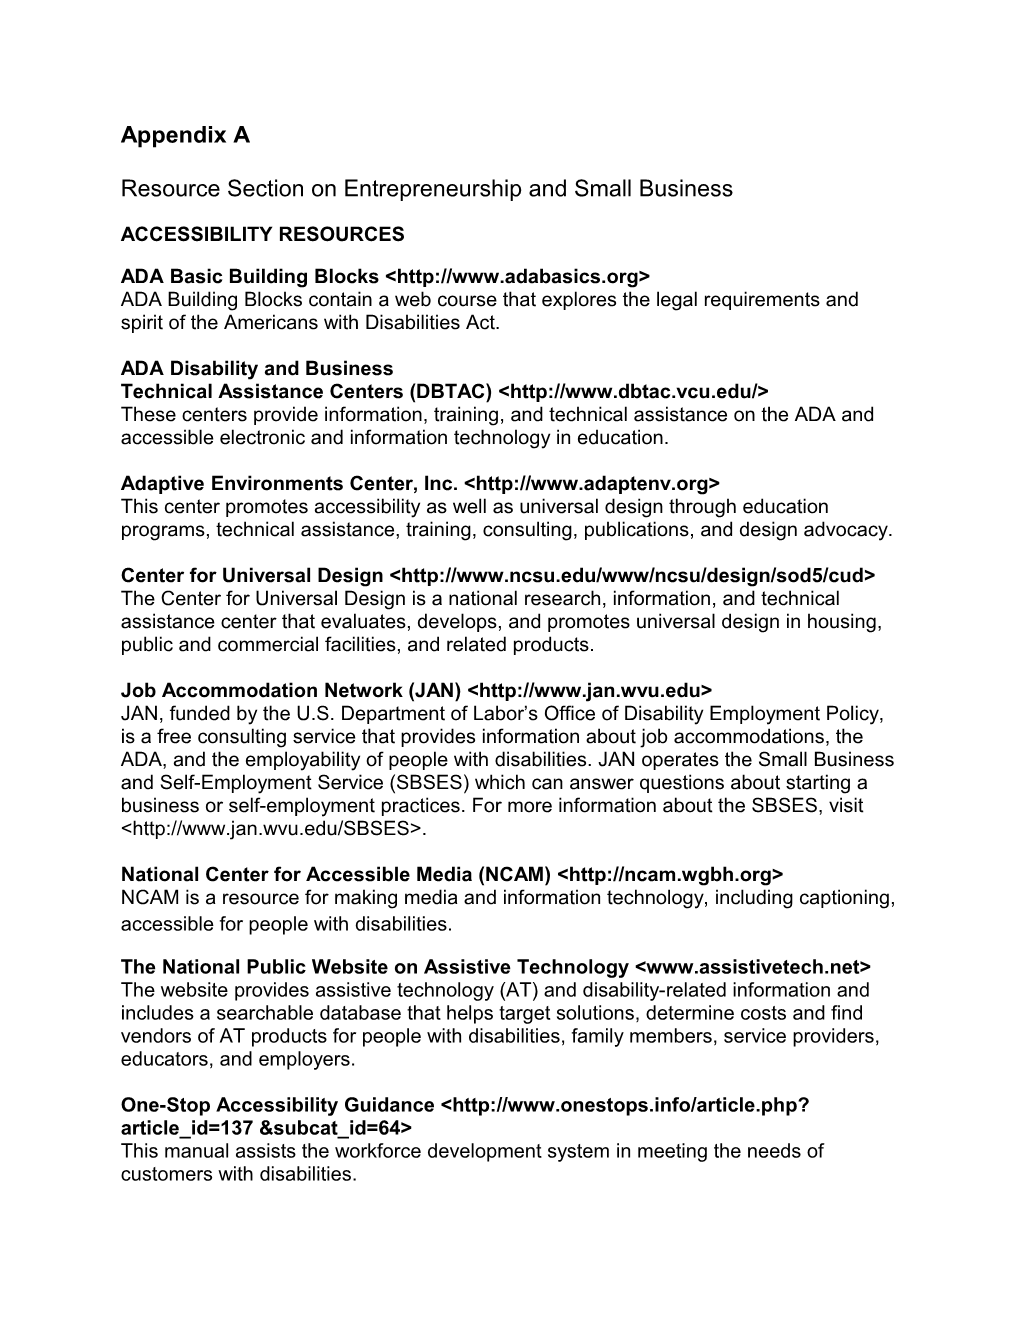 Resource Section on Entrepreneurship and Small Business